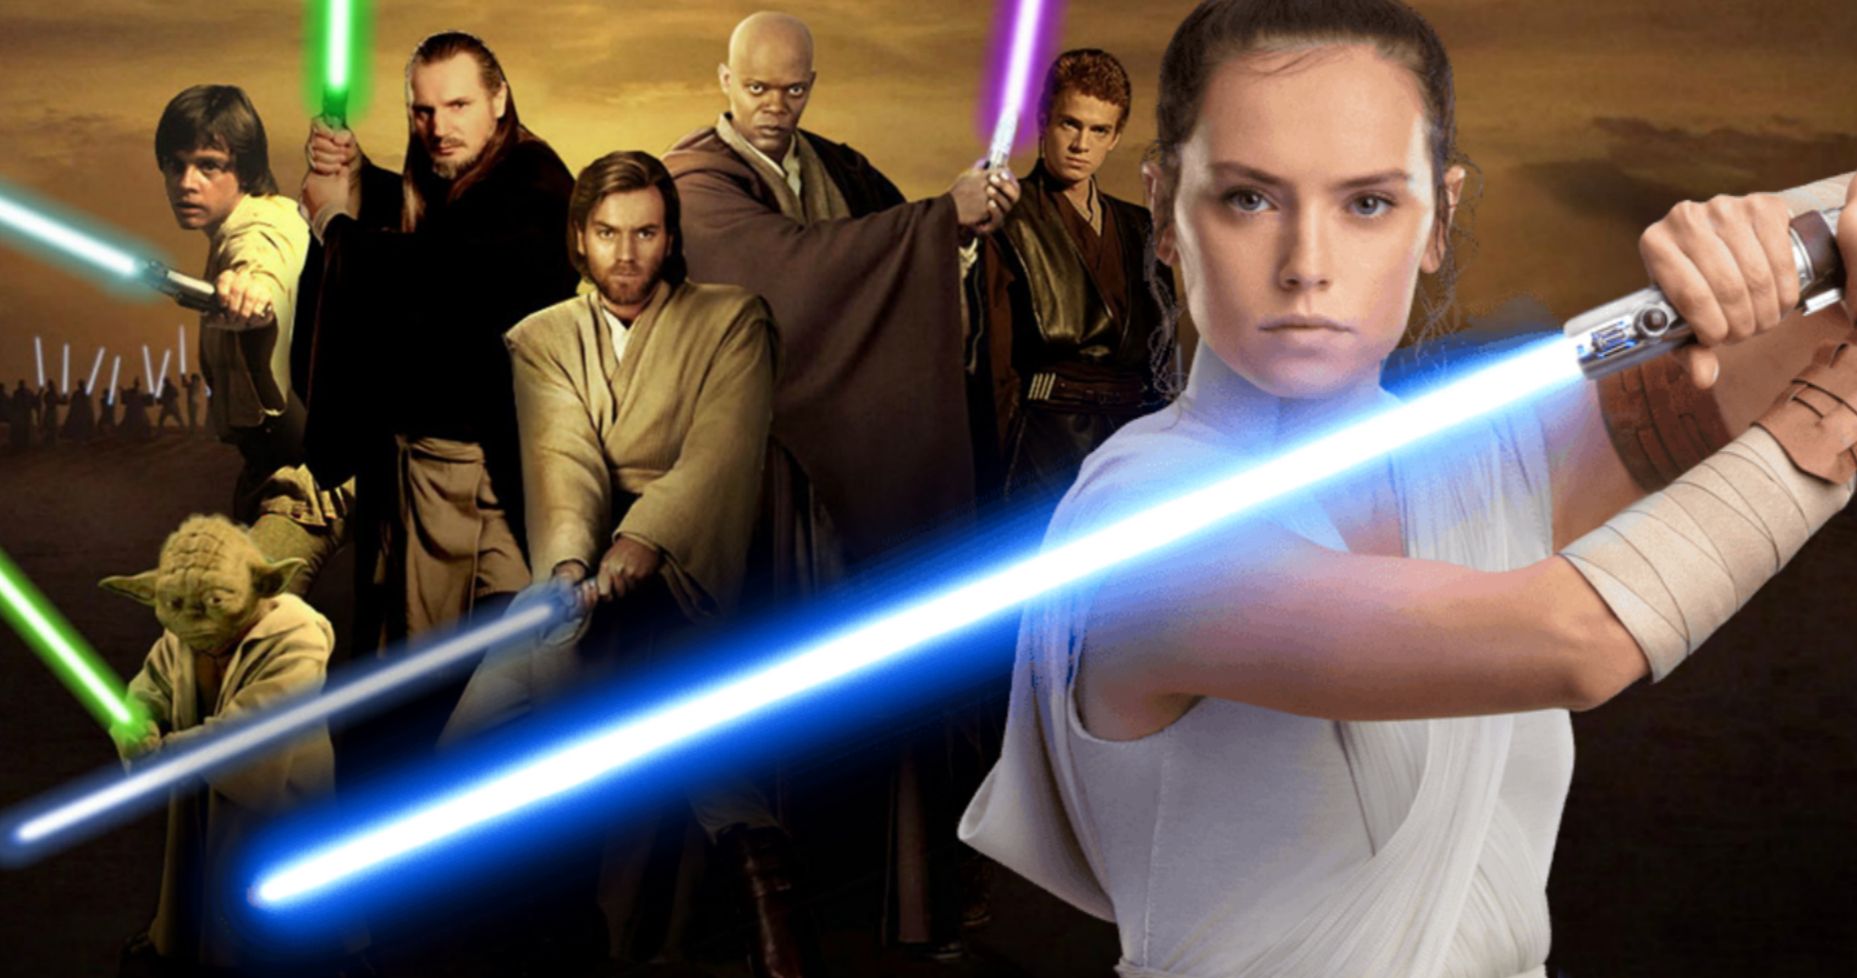 Explained: What is a Jedi?